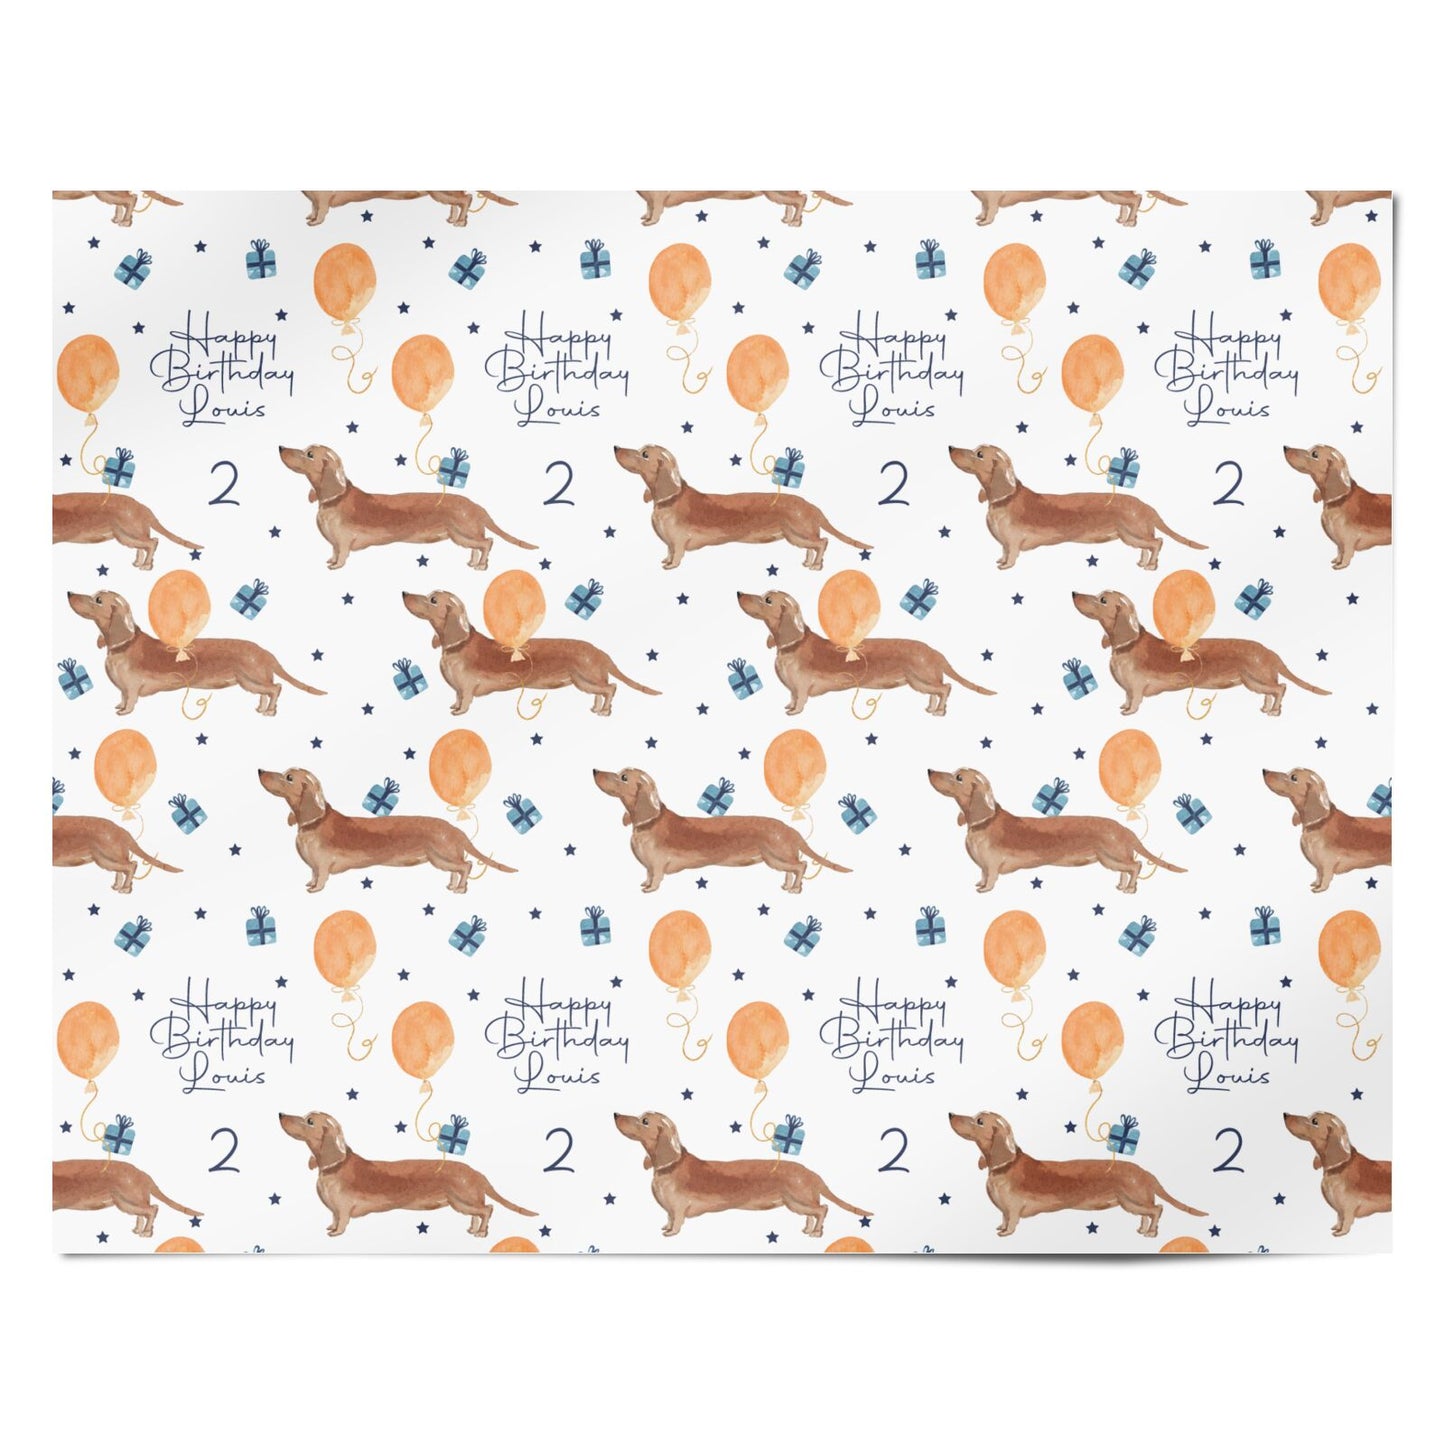 Personalised Dachshund Birthday Personalised Wrapping Paper Alternative